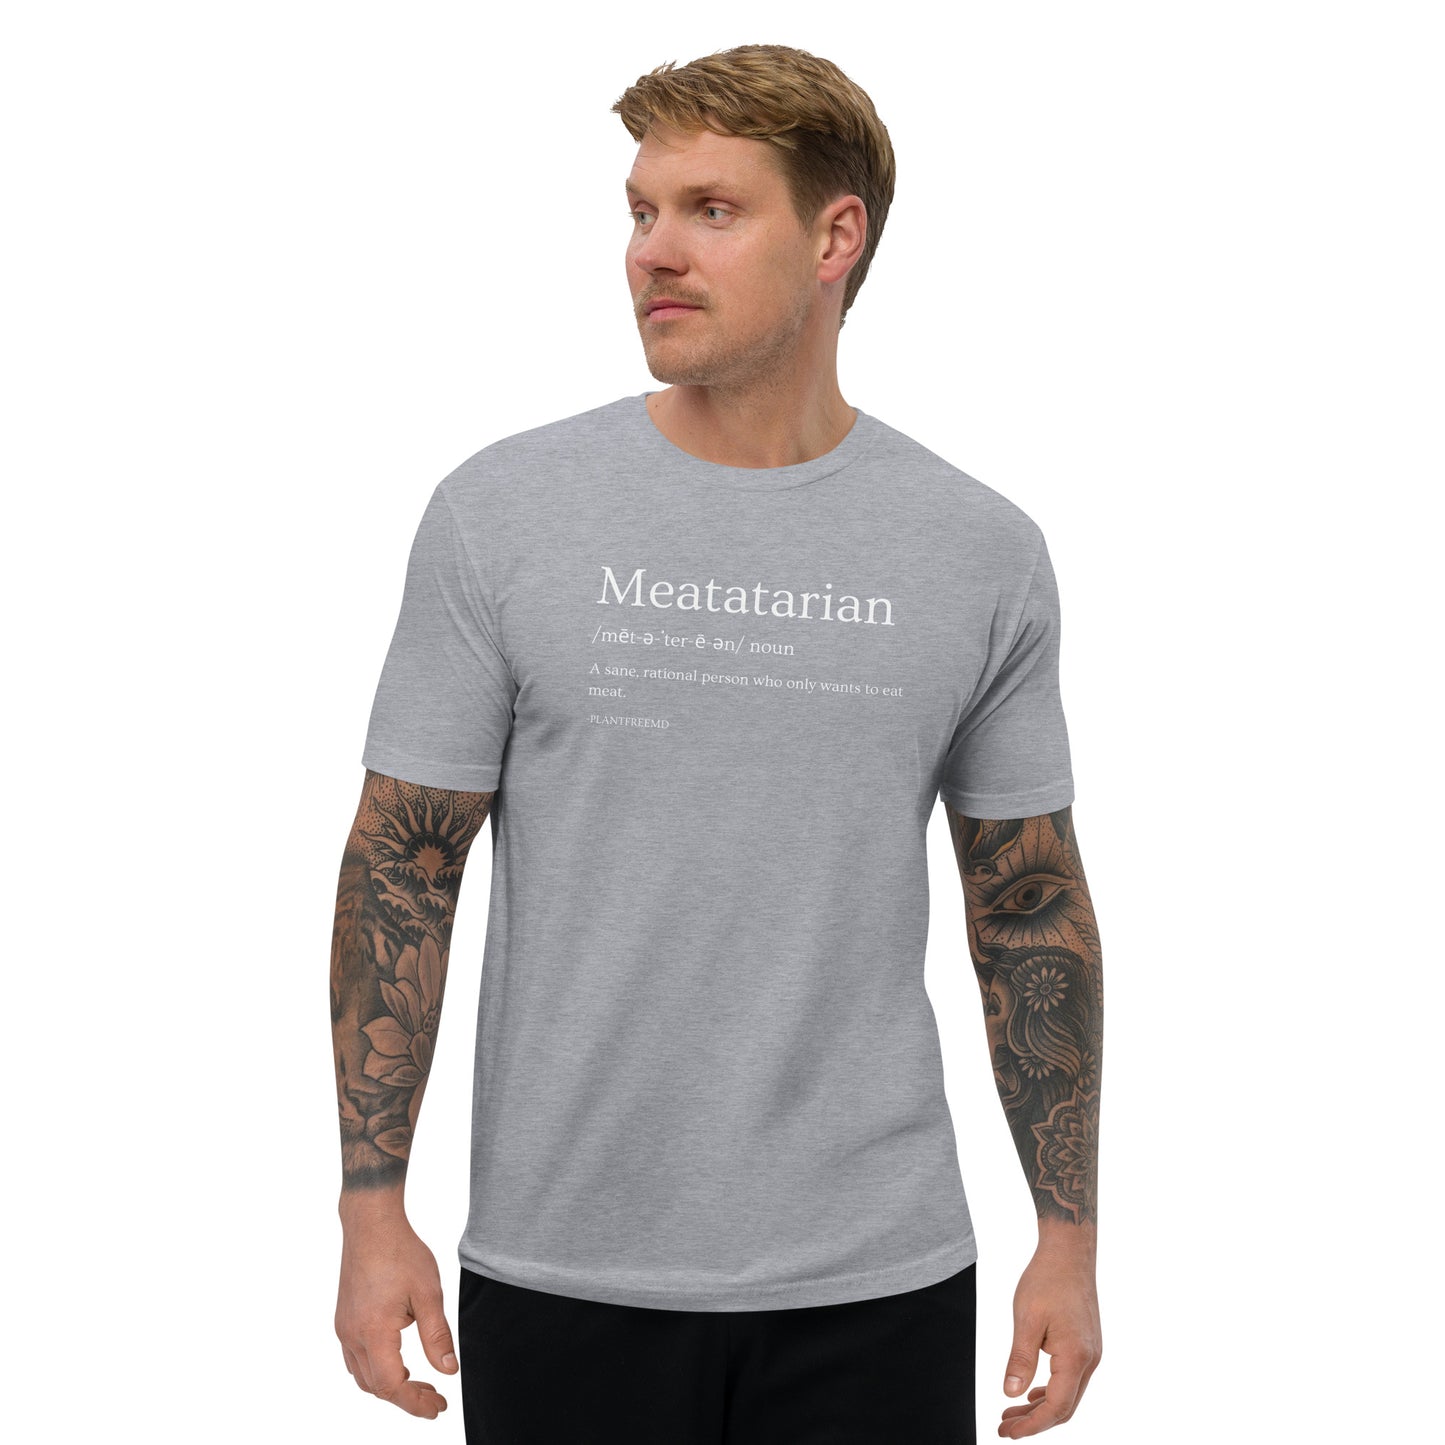 Meatatarian Men's Fitted T-shirt